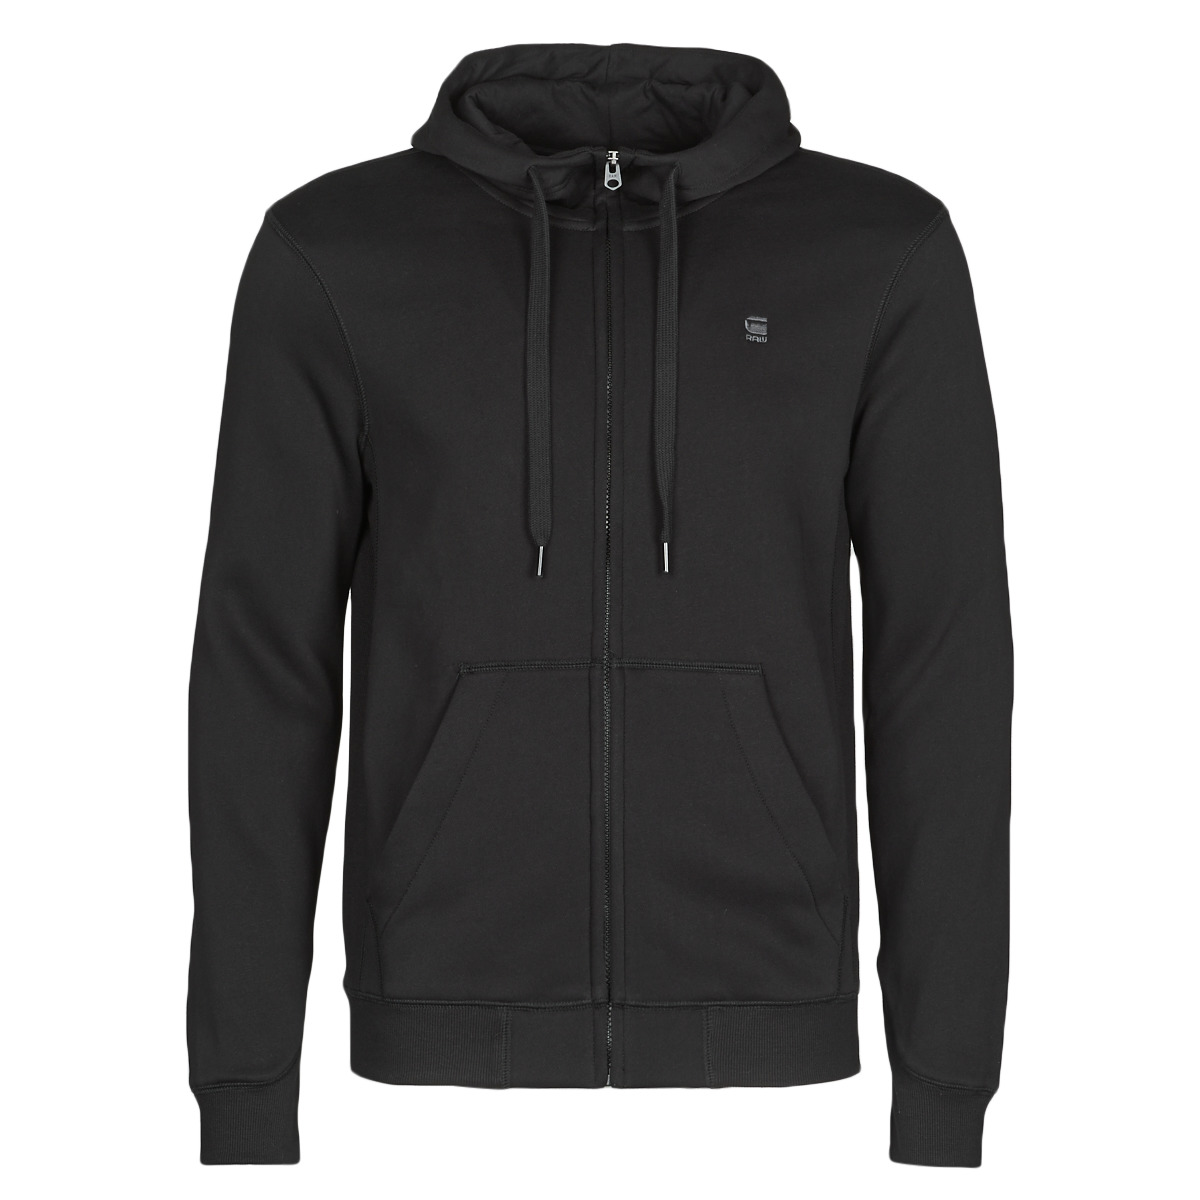 G-Star Raw PREMIUM ! Clothing Men | CORE Fast - Black ZIP Europe delivery € sweaters SW Spartoo 110,00 LS HDD 